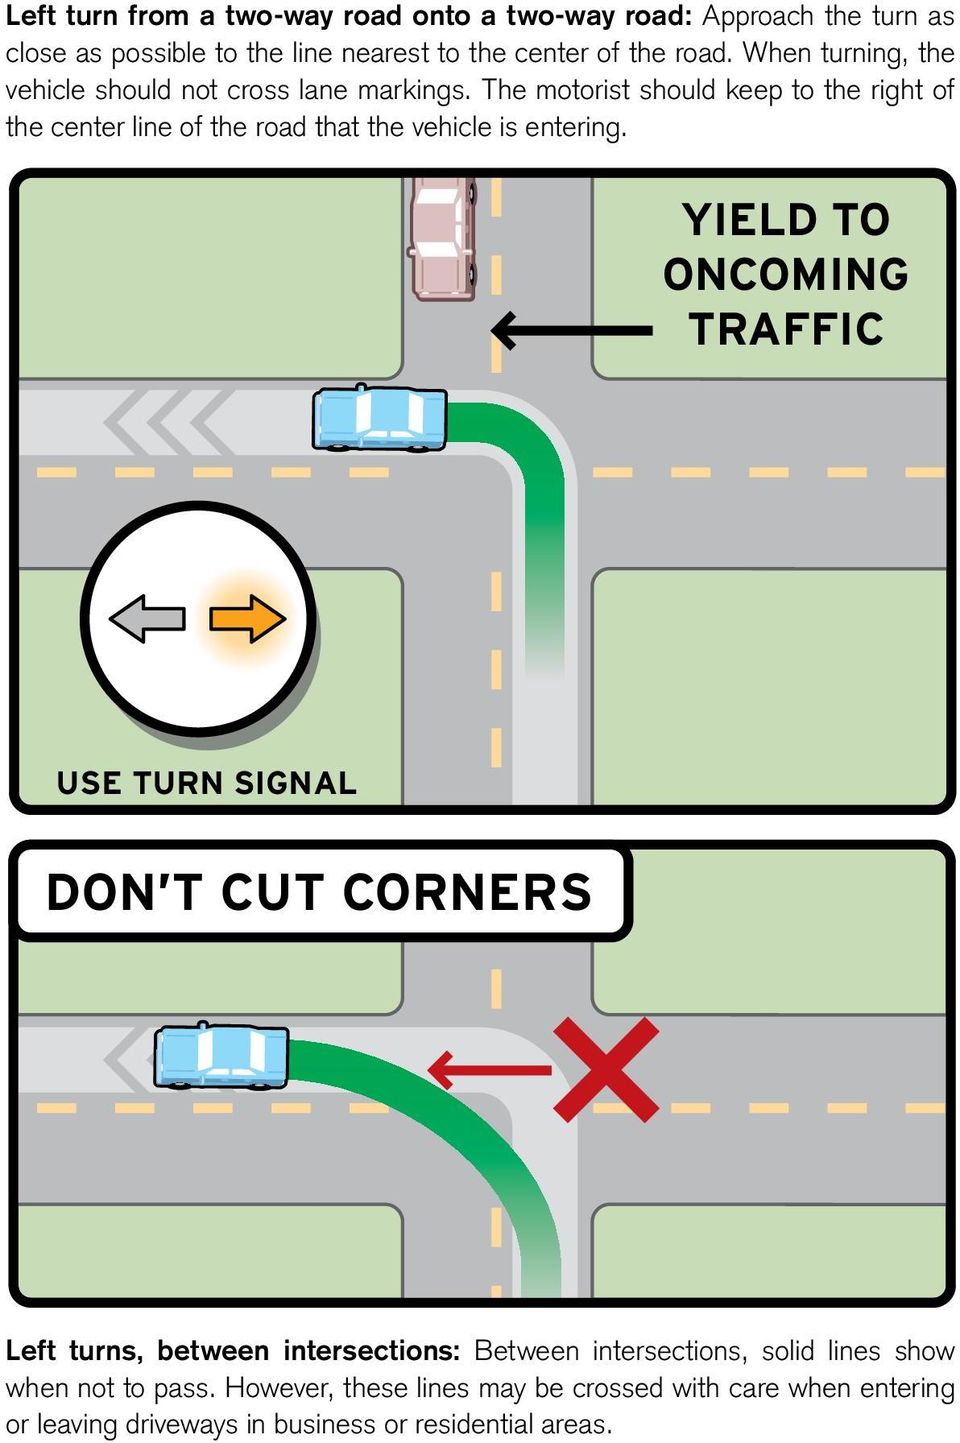 The motorist should keep to the right of the center line of the road that the vehicle is entering.